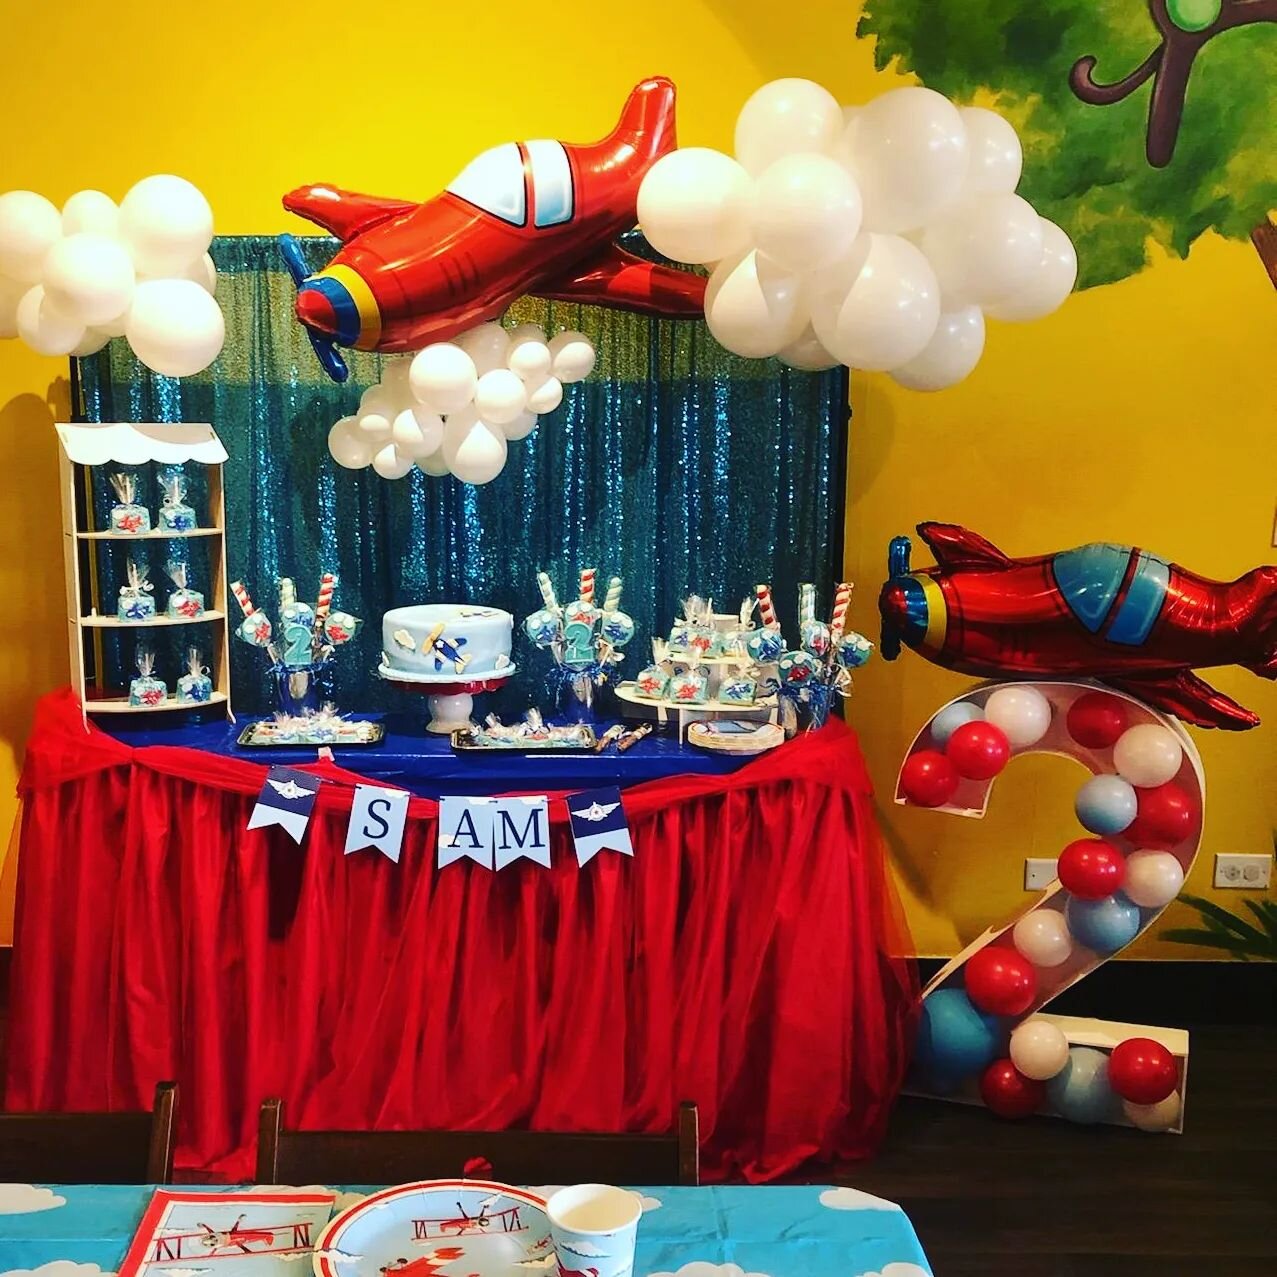 #cloudsandairplanes is one of our very favorite themes. Happy birthday, Sam! We adored celebrating with you! ✈️